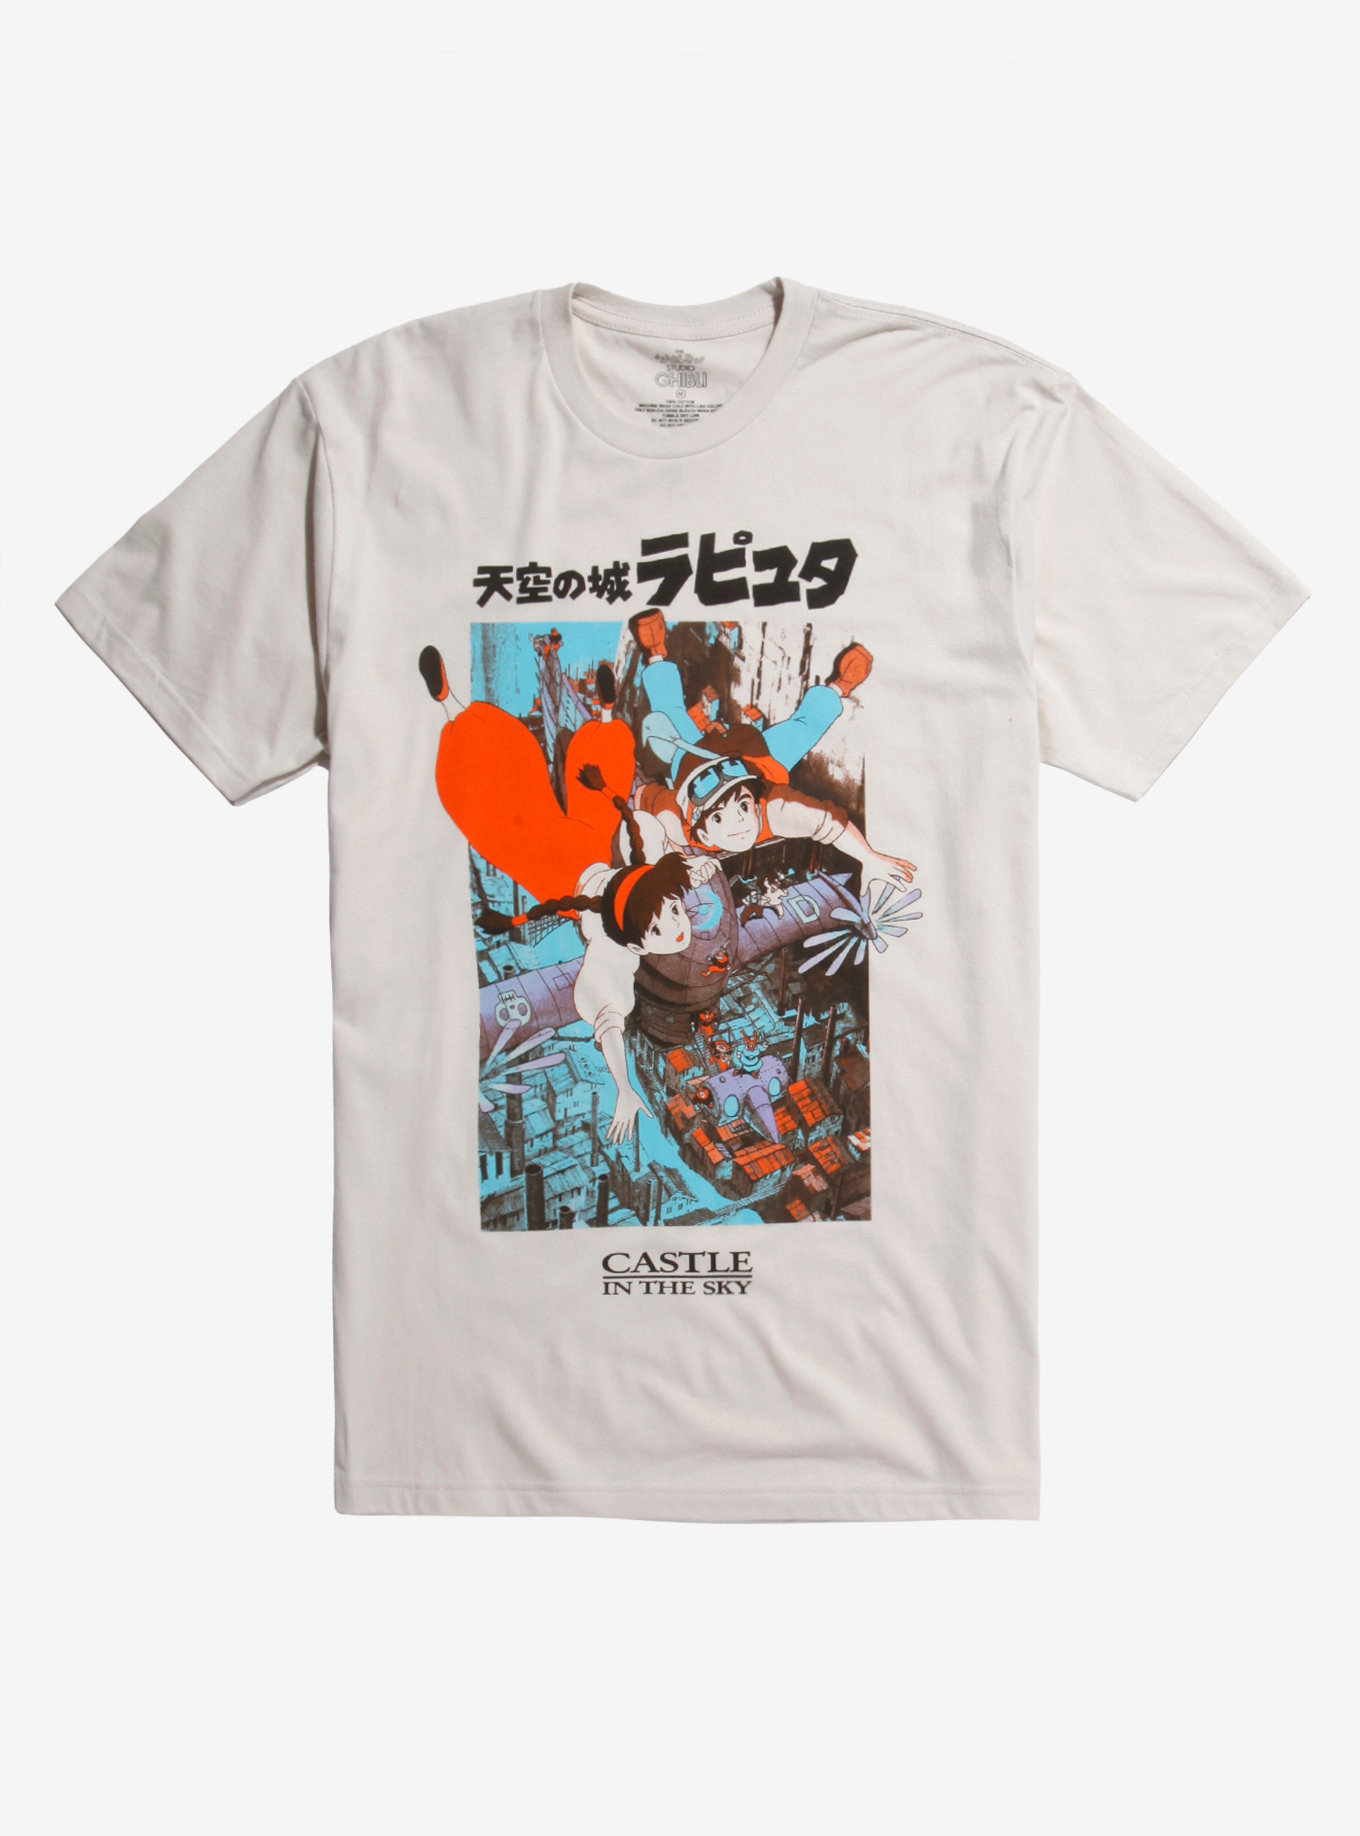 a tee with Sheeta and Pazu together on it